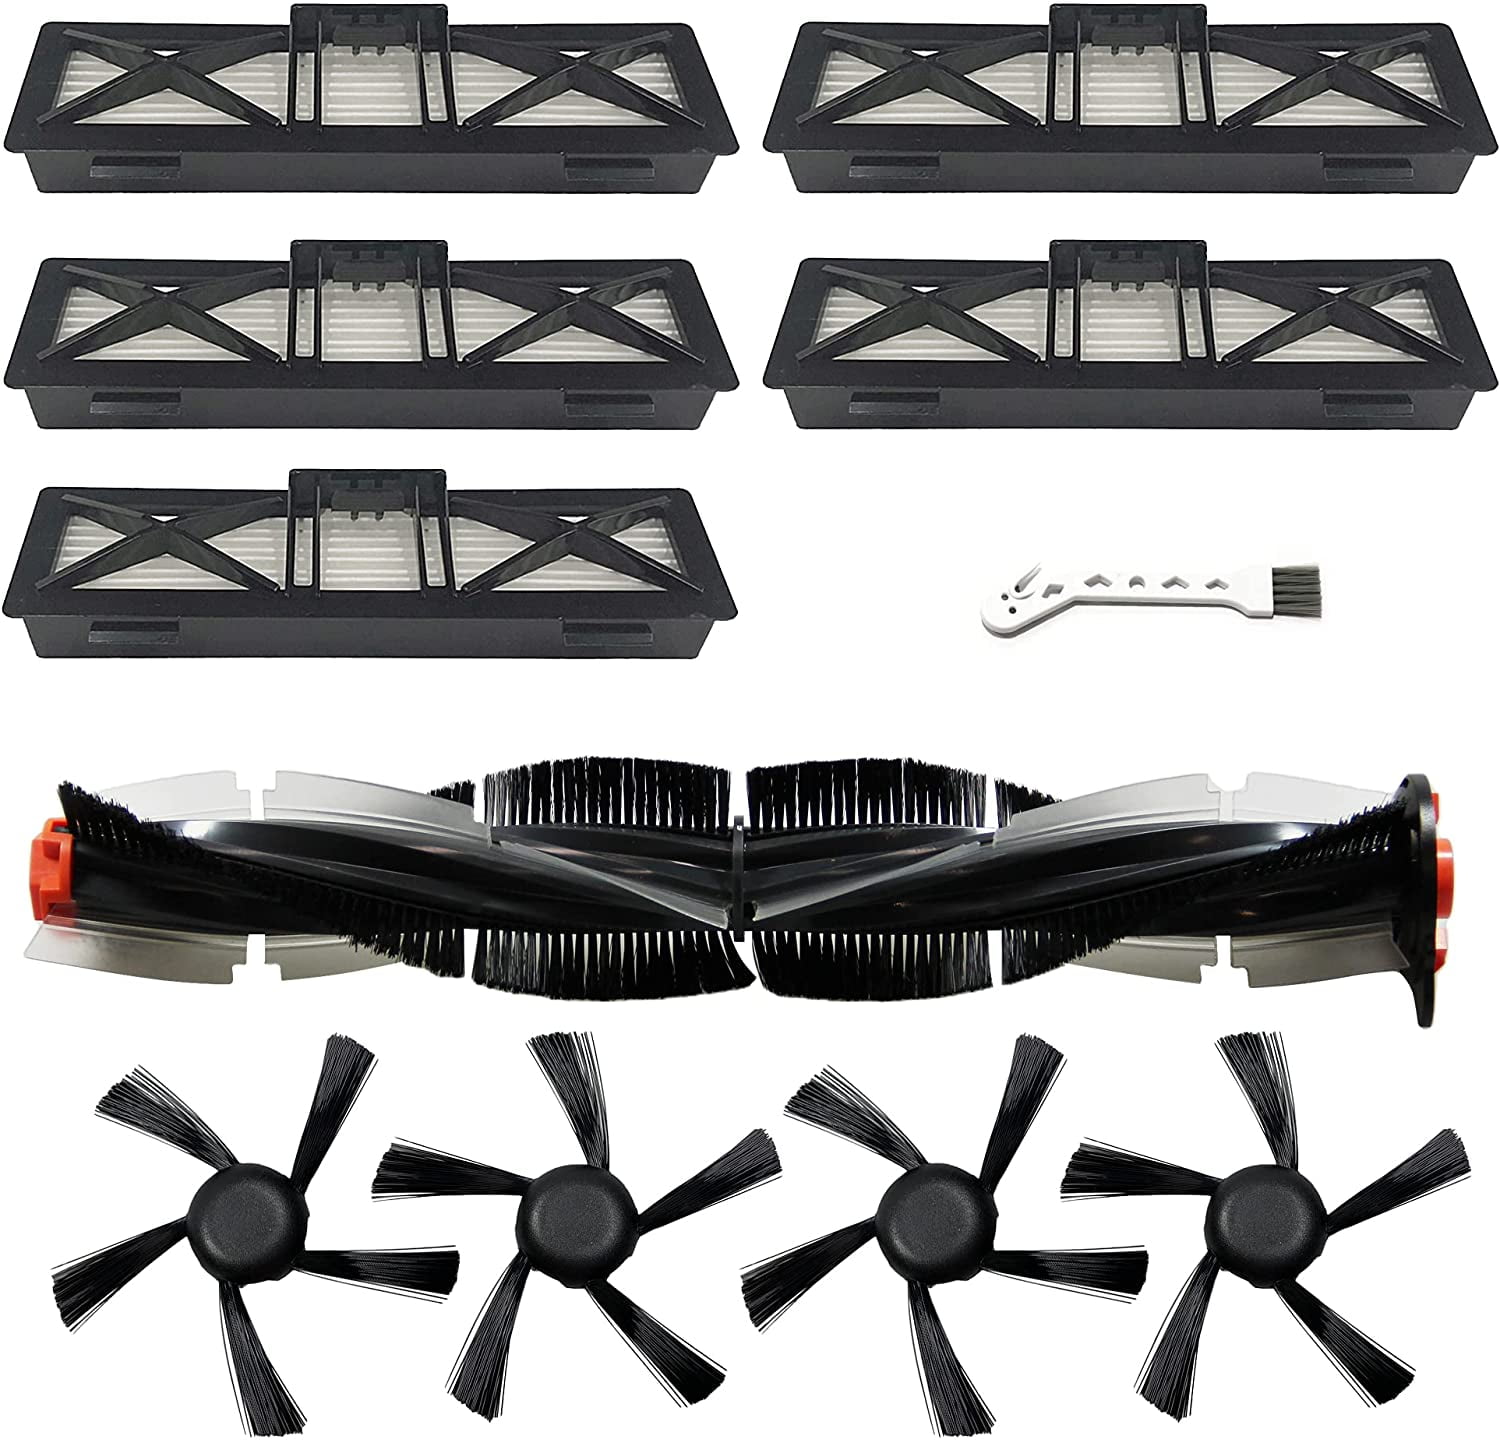 Filter Side Brushes Replacement Set For Neato Botvac 70e 75 80 85 D75 D80 